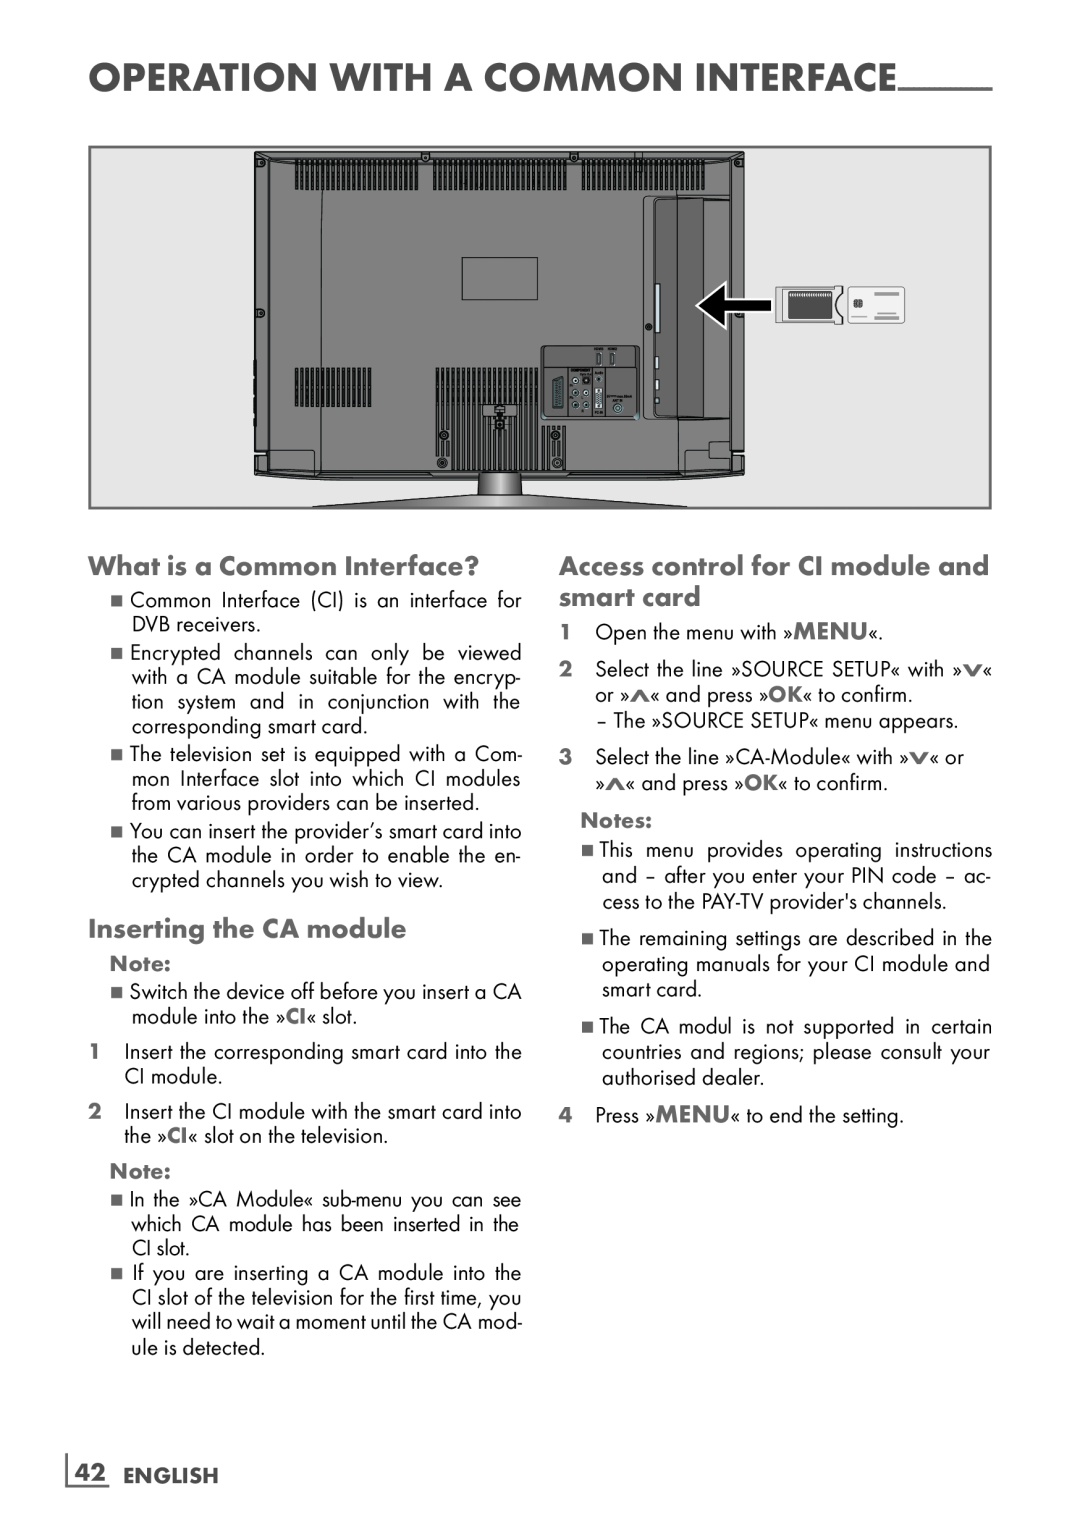 Grundig 32 VLD 4201 BF What is a Common Interface?, Inserting the CA module, Access control for CI module and smart card 